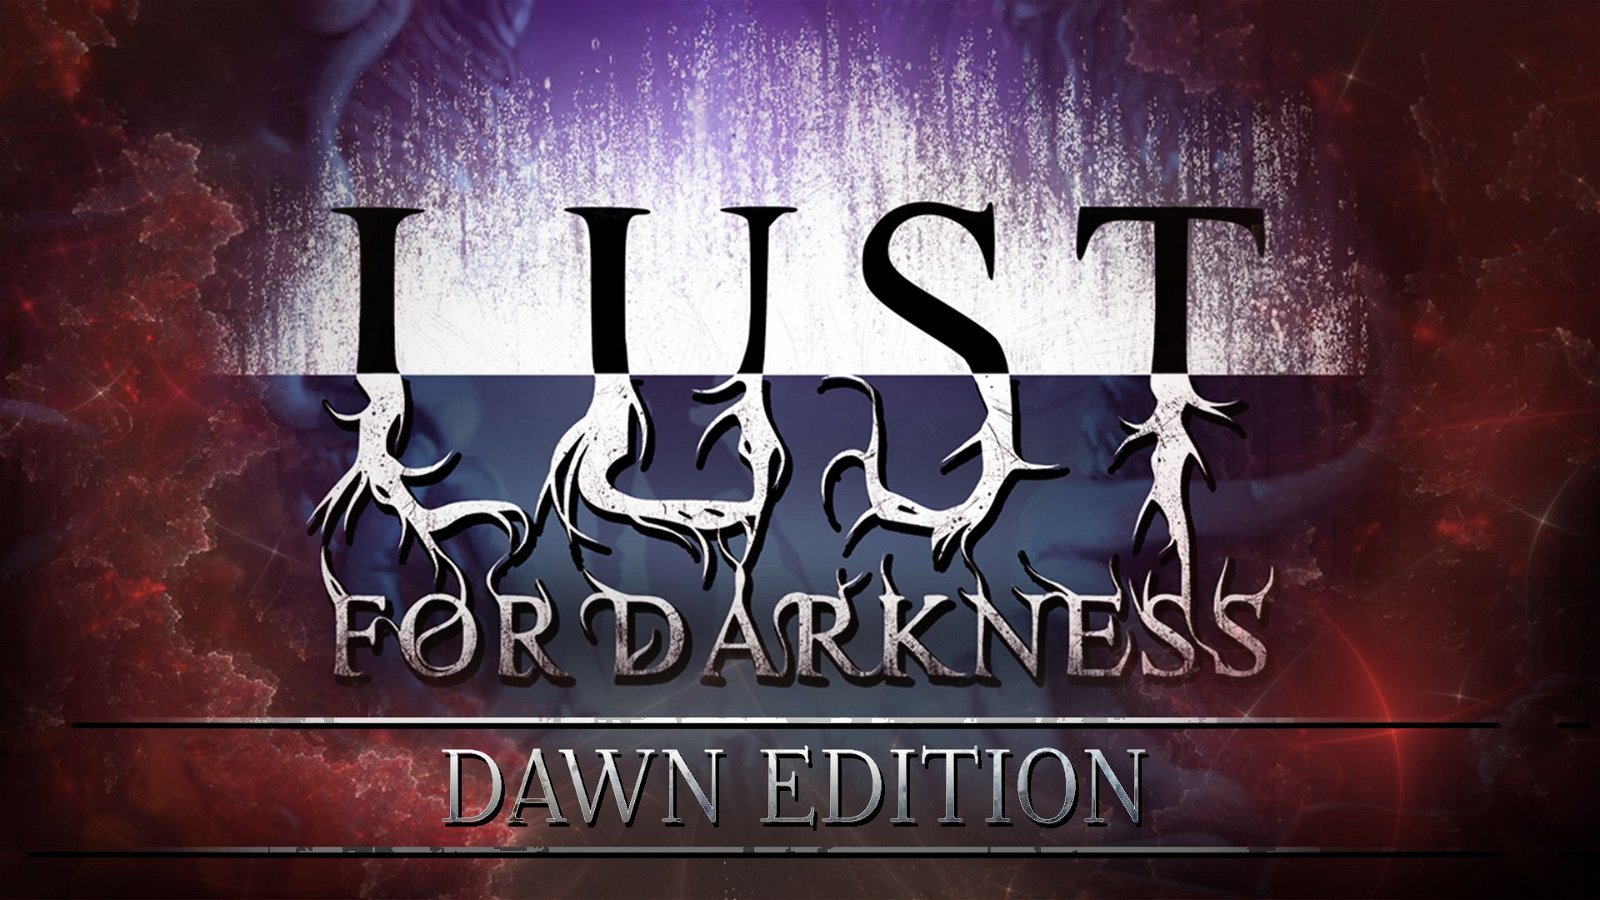 Image of Lust for Darkness: Dawn Edition